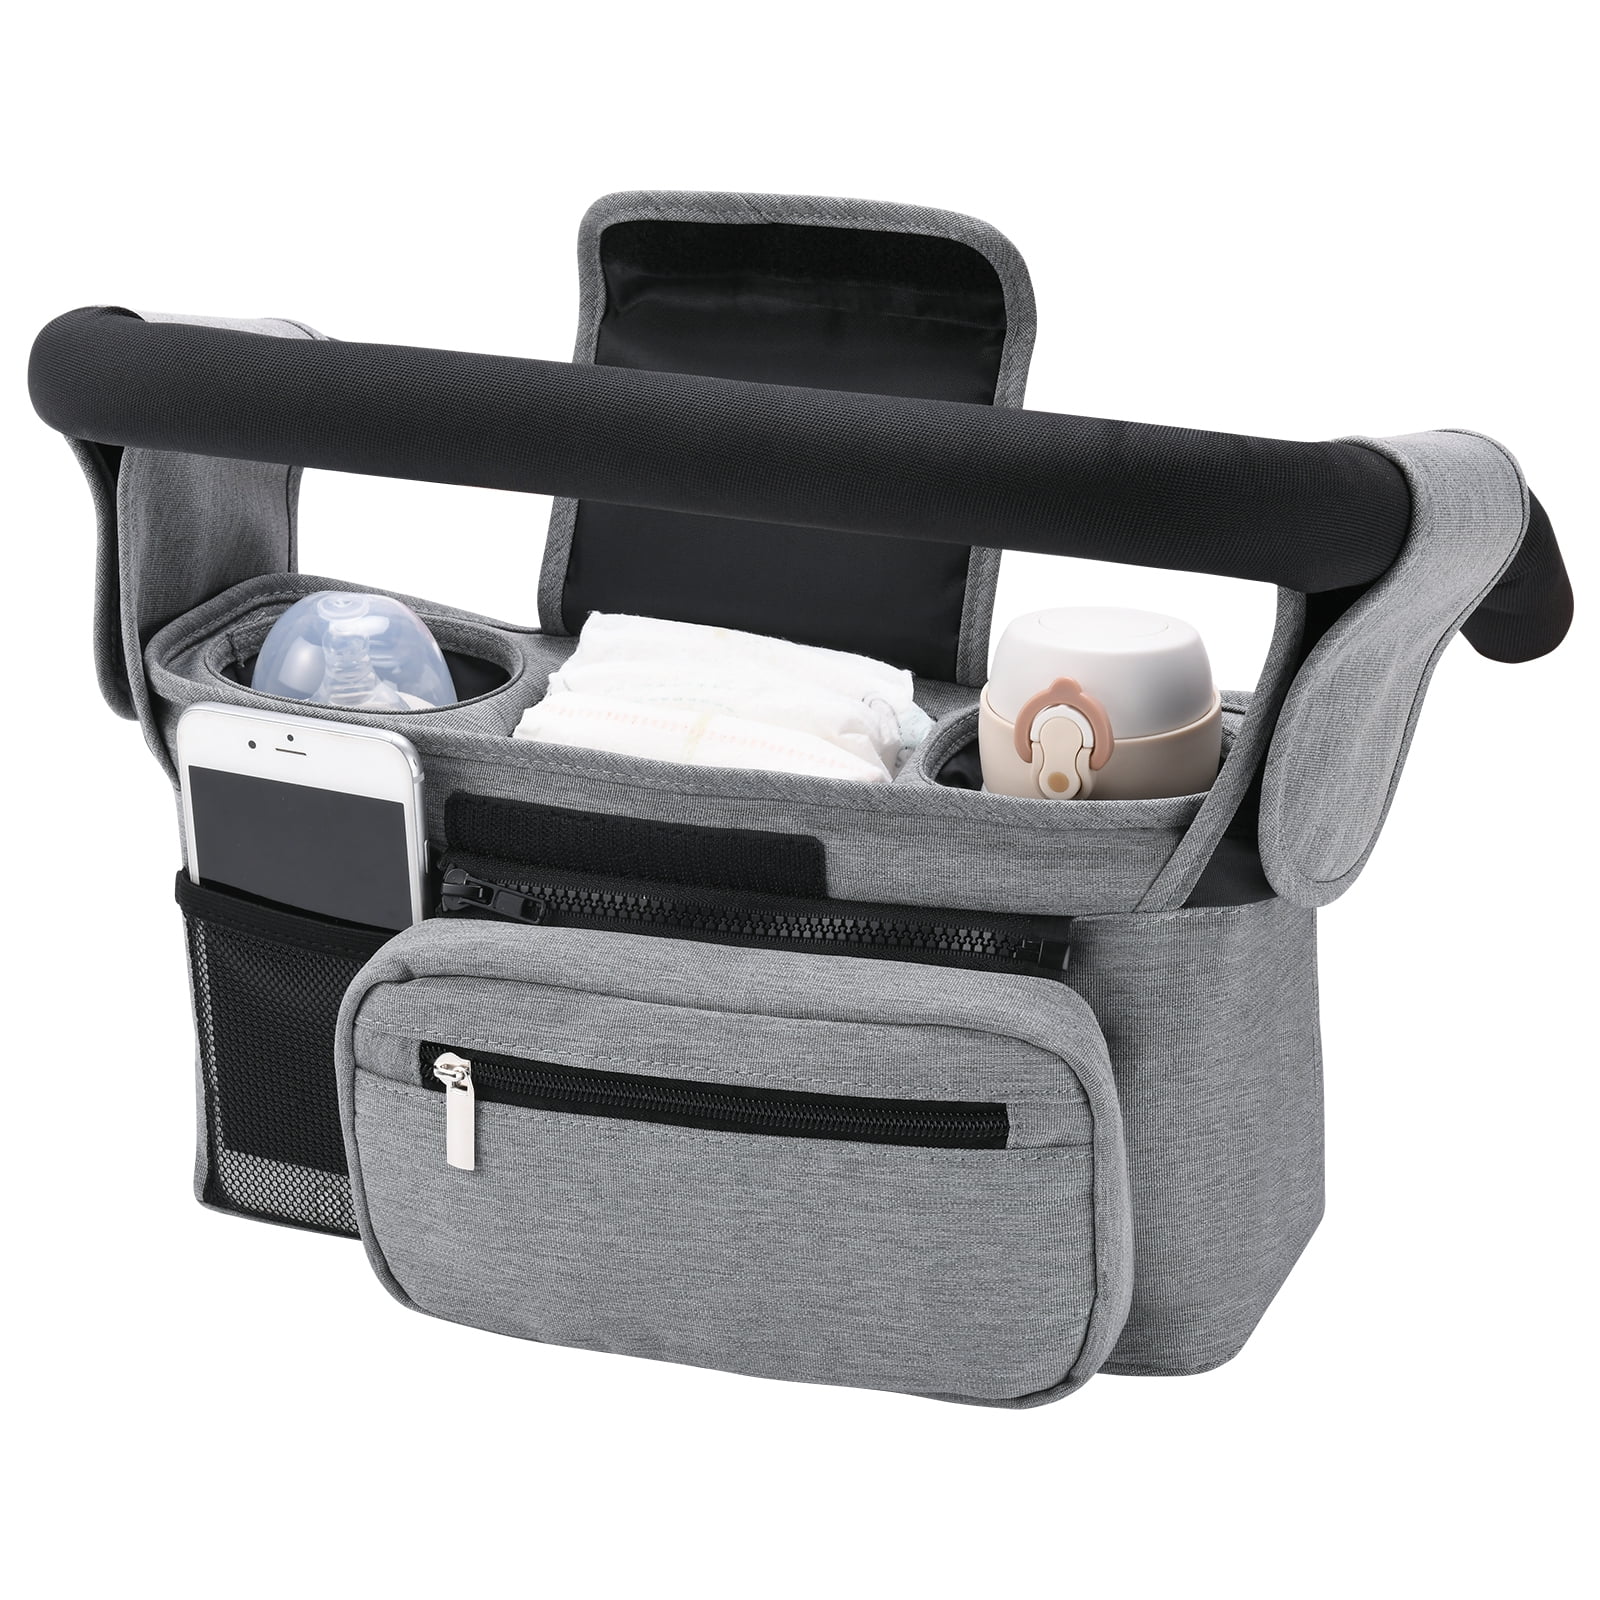 Baby Jogger Caddy with Cup Holder 3 Sprouts Universal Stroller Organizer 